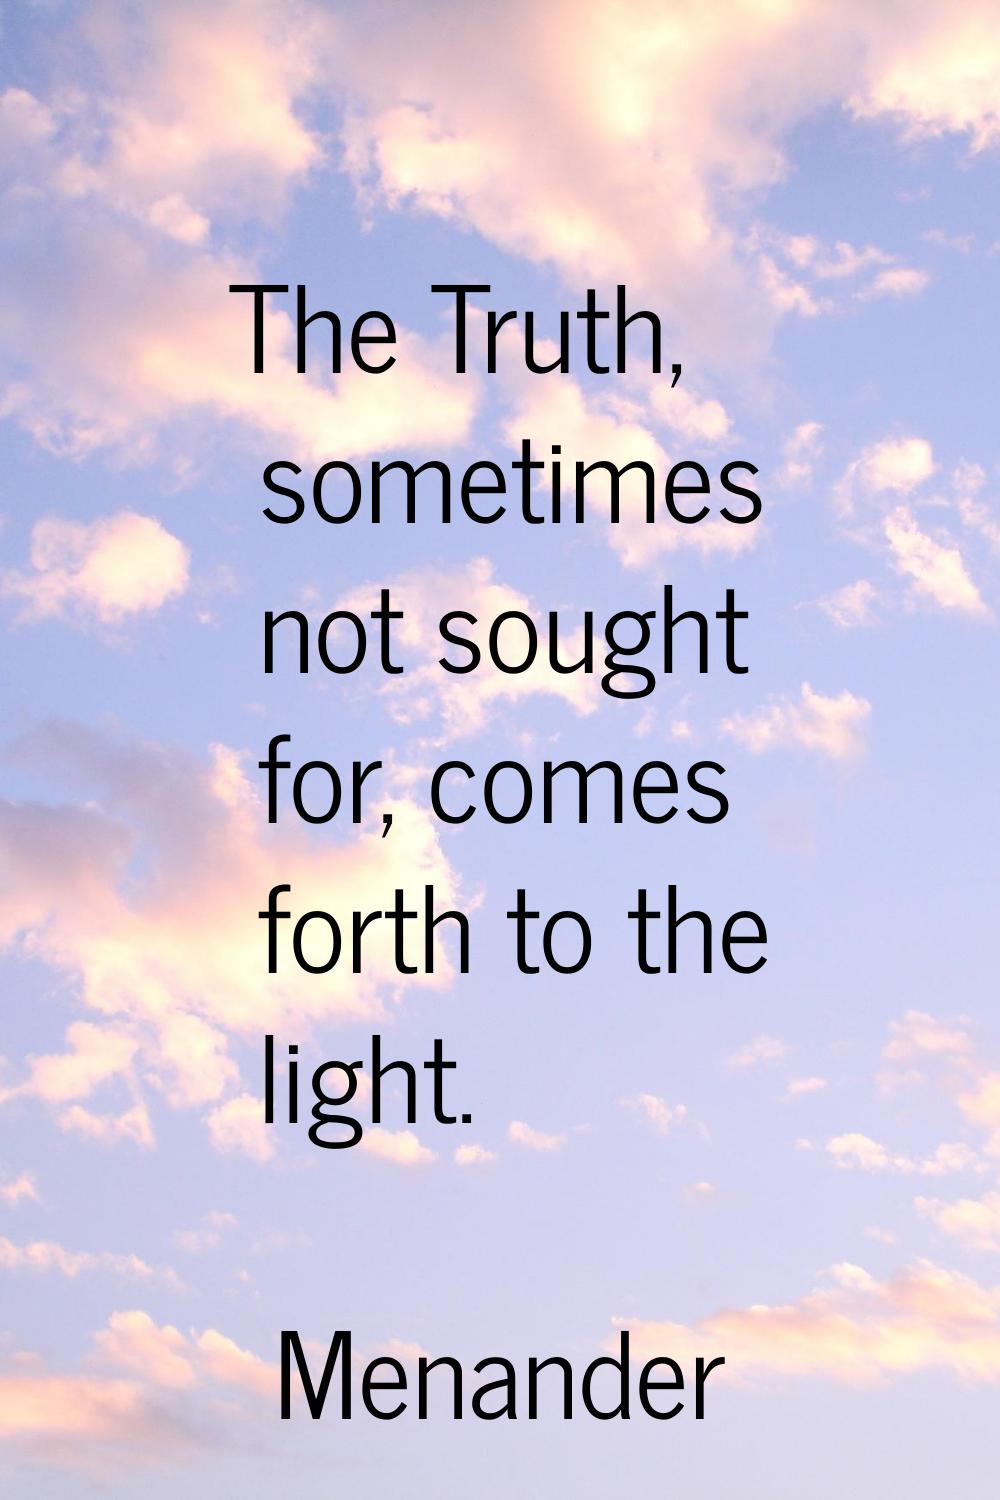 The Truth, sometimes not sought for, comes forth to the light.